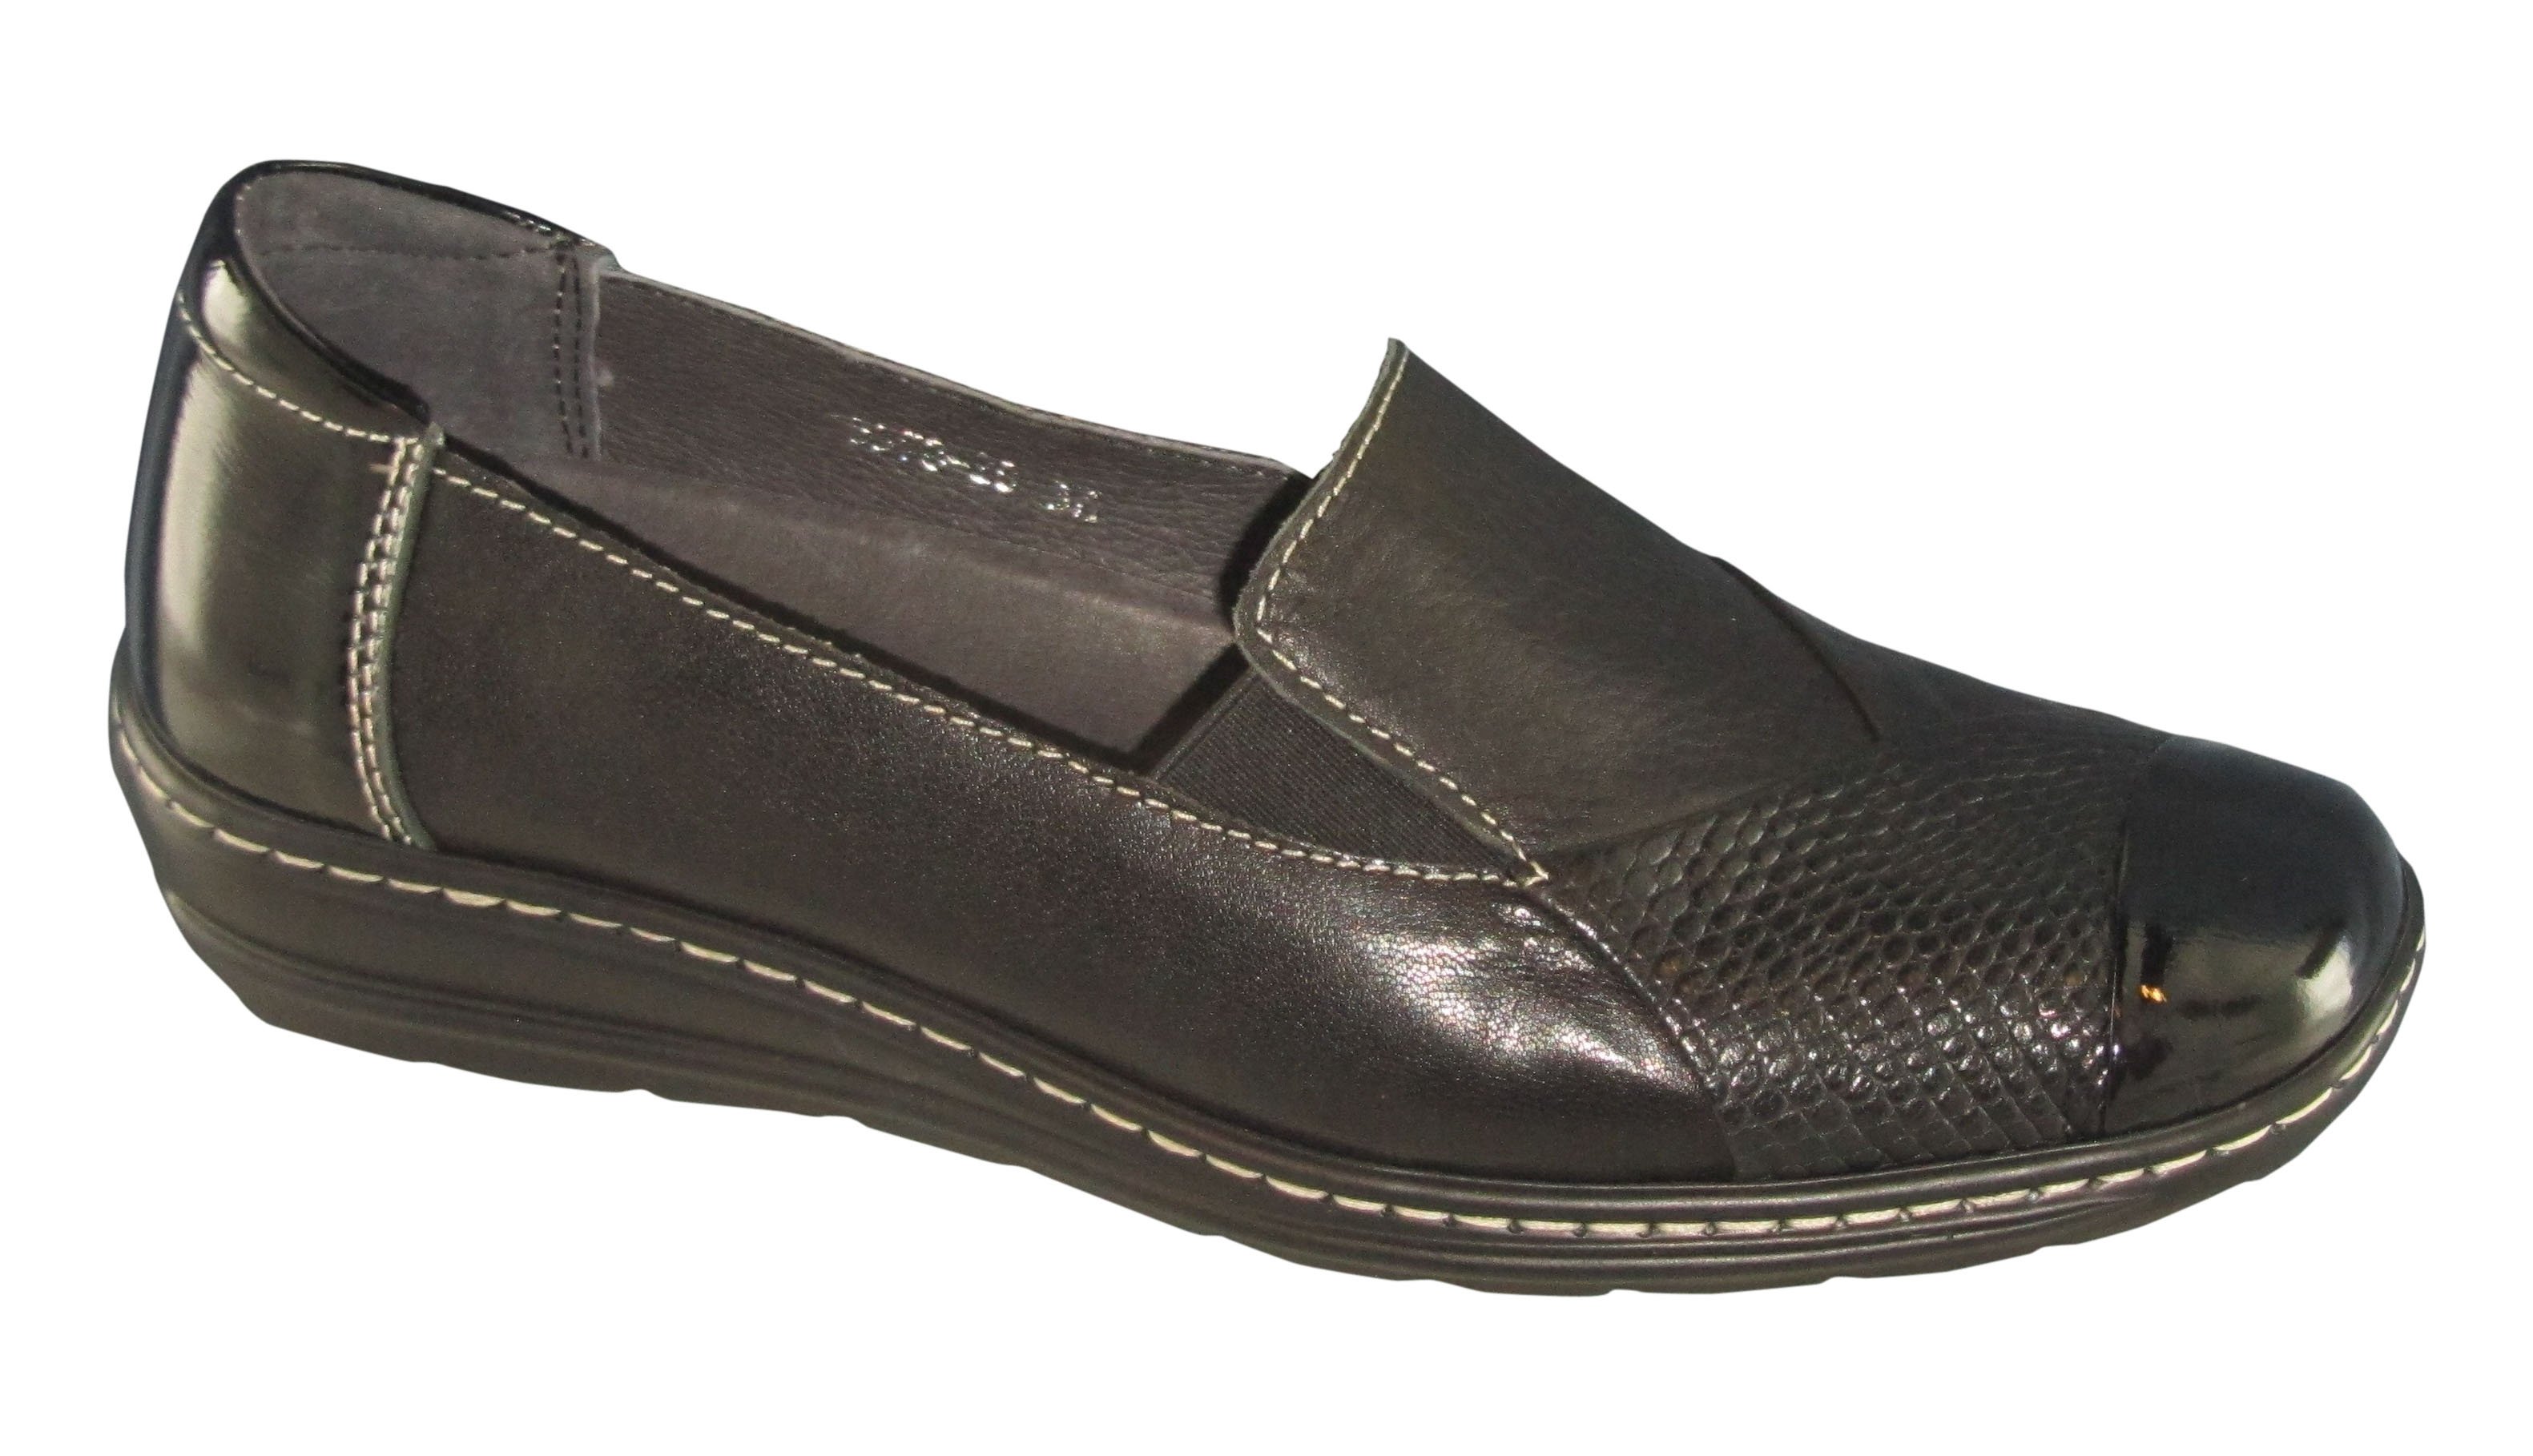 MELODY CASSINI - WOMENS SHOES-SHOES - low to flat : Shirley's Shoes ...